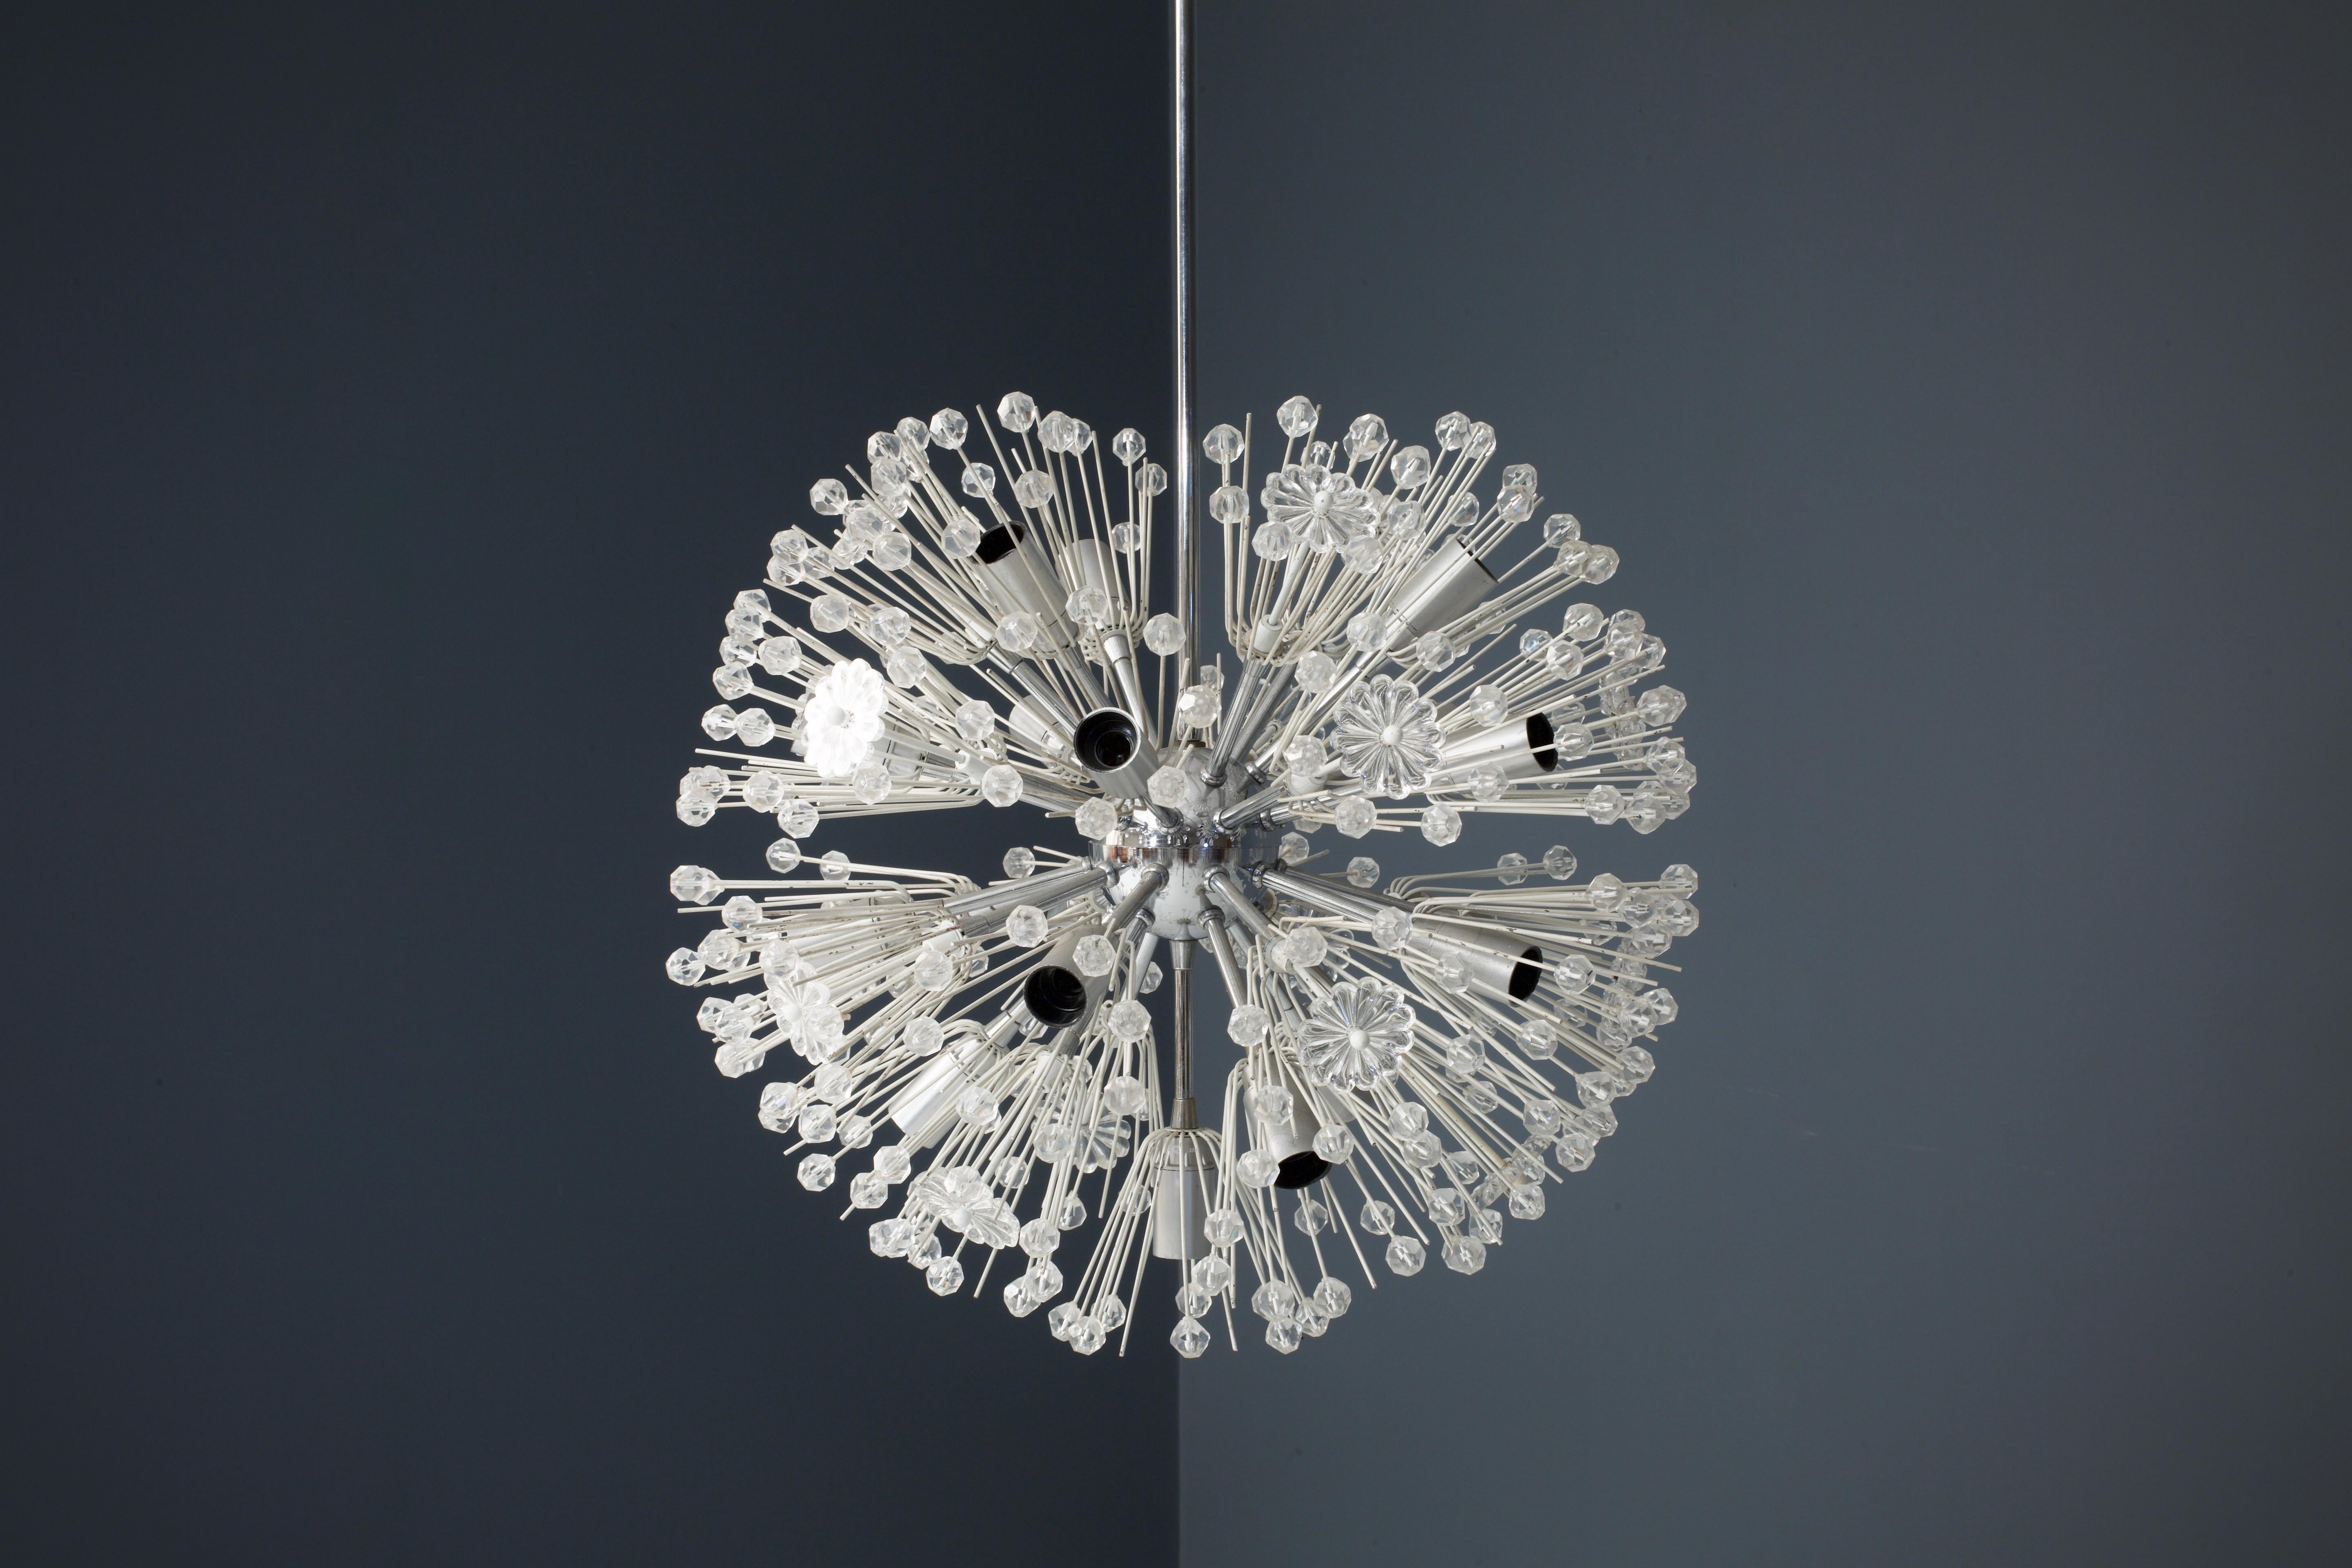 'Dandelion' Sputnik chandelier by Emil Stejnar, Vienna, Austria, 1955. Produced by Rupert Nikoll. This chandelier is made of faceted glass in the shapes of snowflakes. The Sputnik-like base, stem and ceiling cap are still intact and the contrasts